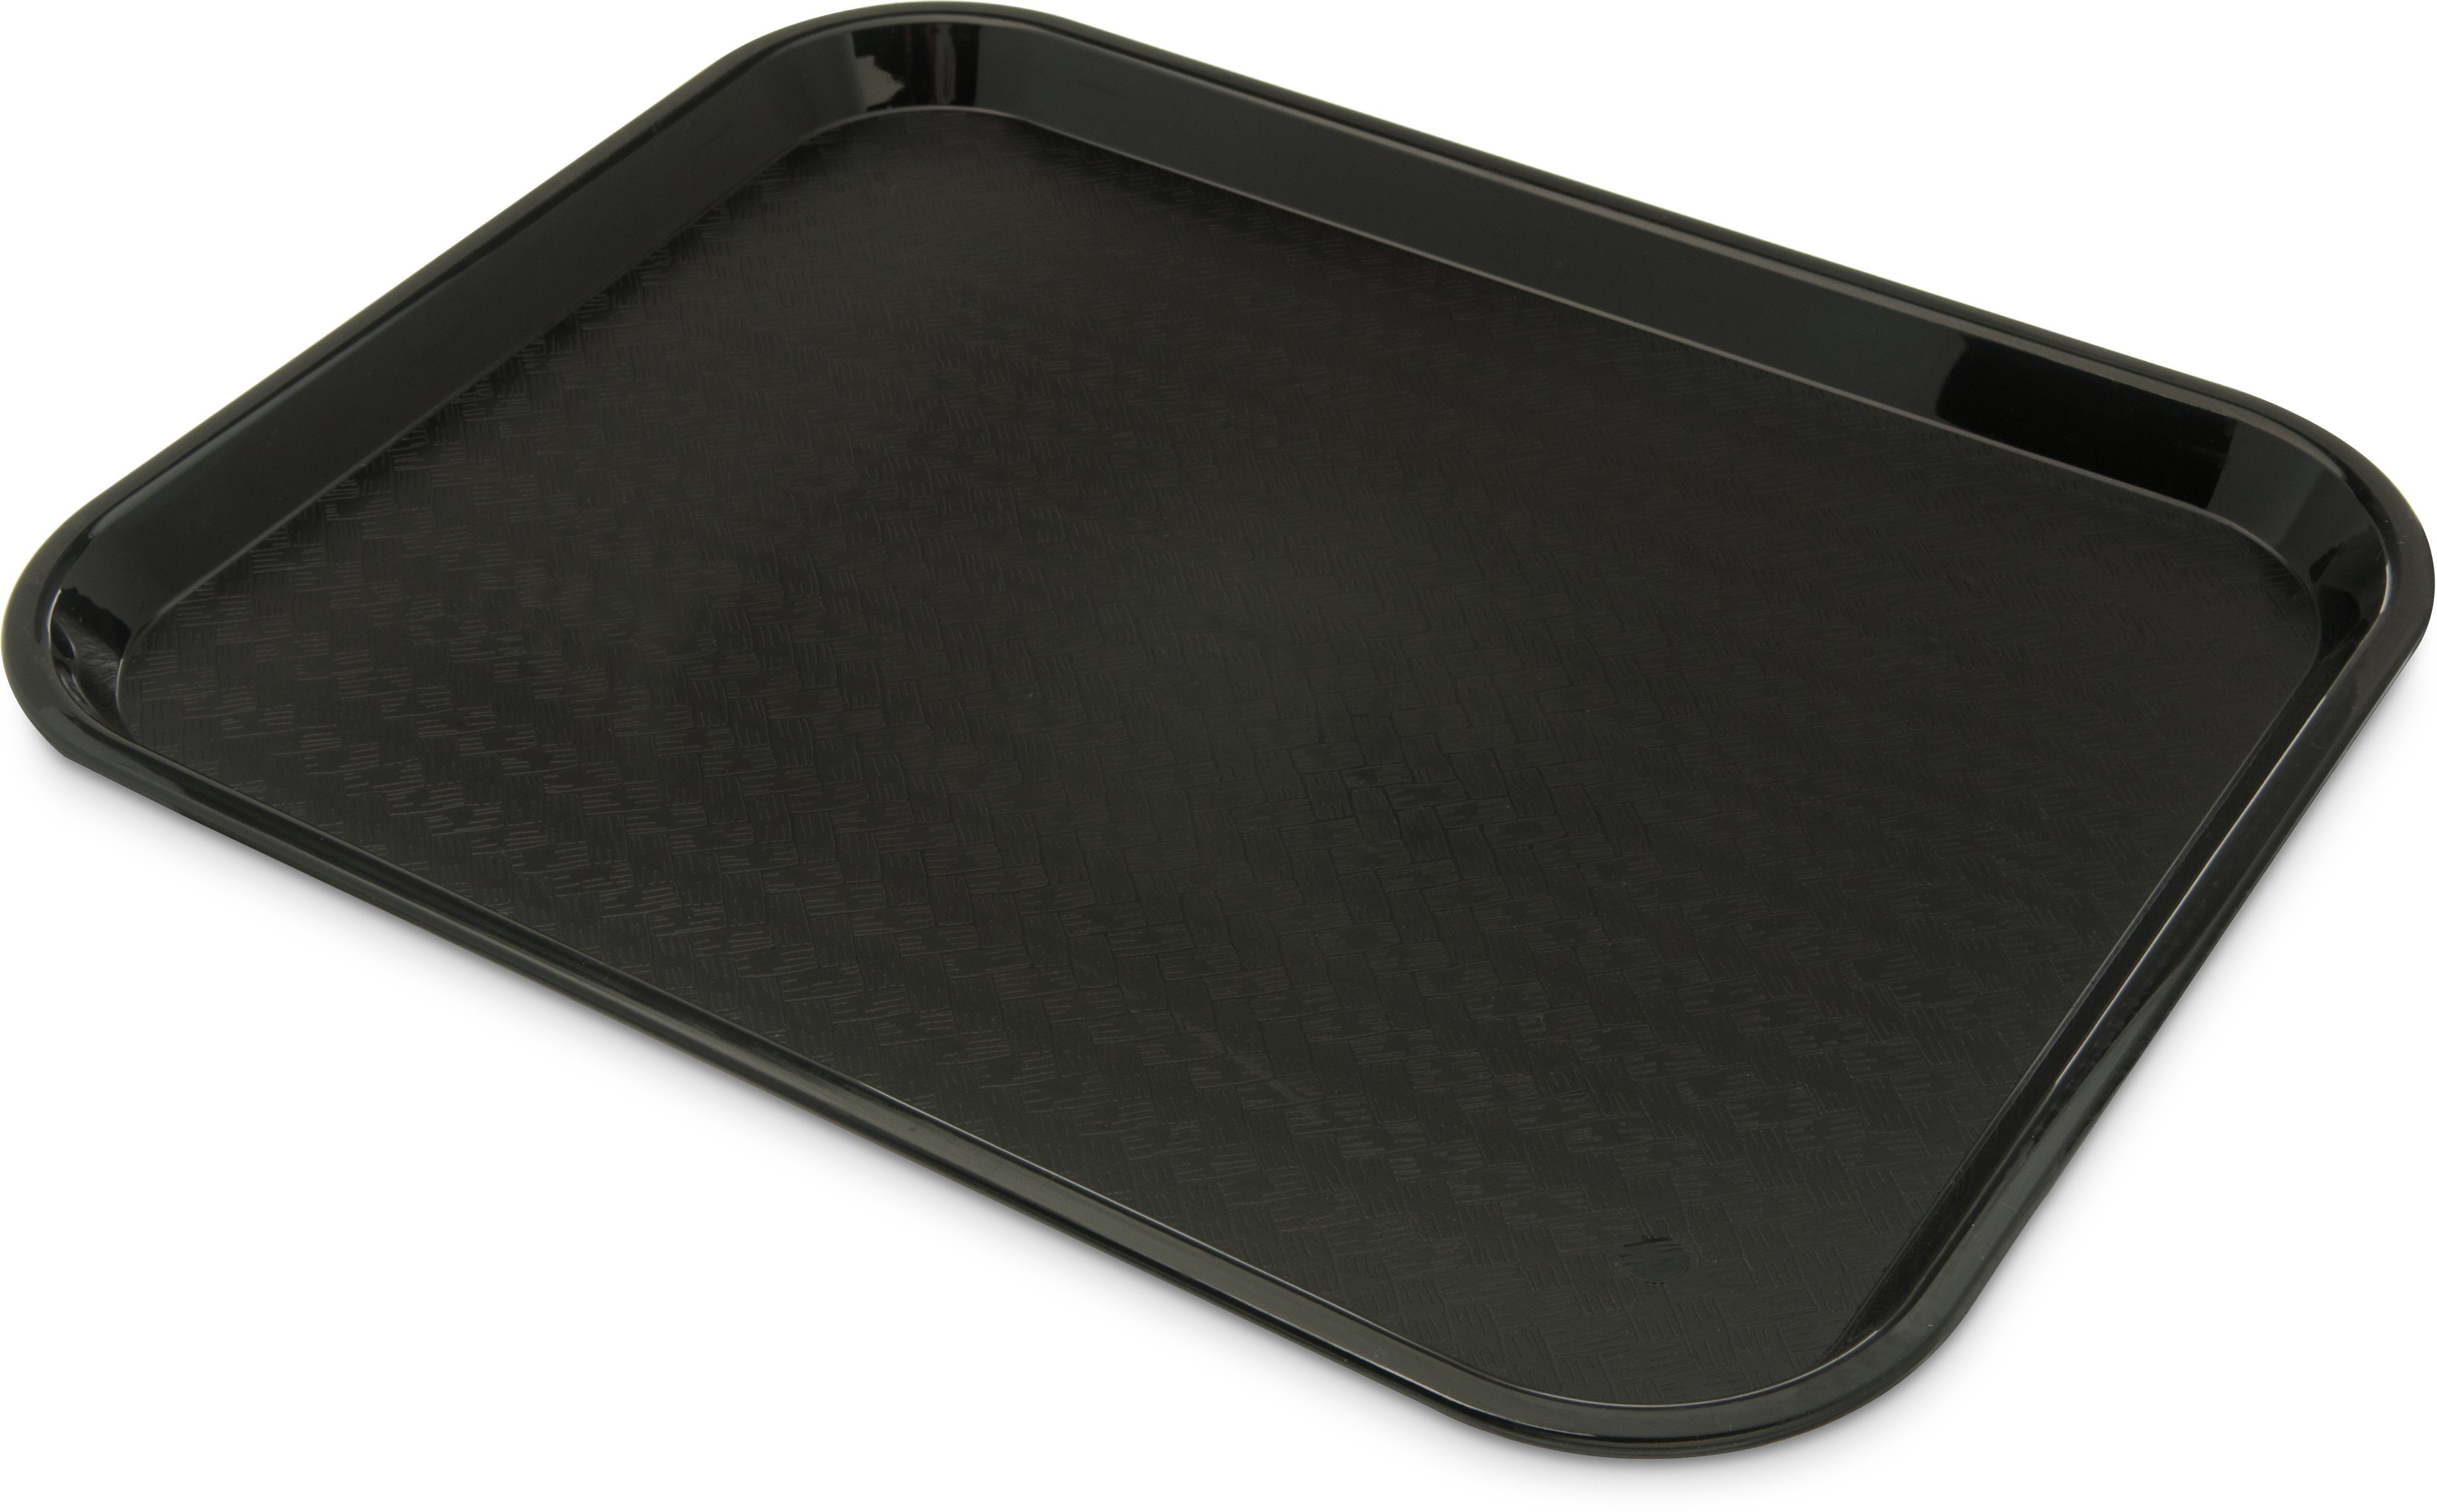 Carlisle 14 in. x 18 in. Polypropylene Tray in Black (Case of 12) CT141803  - The Home Depot